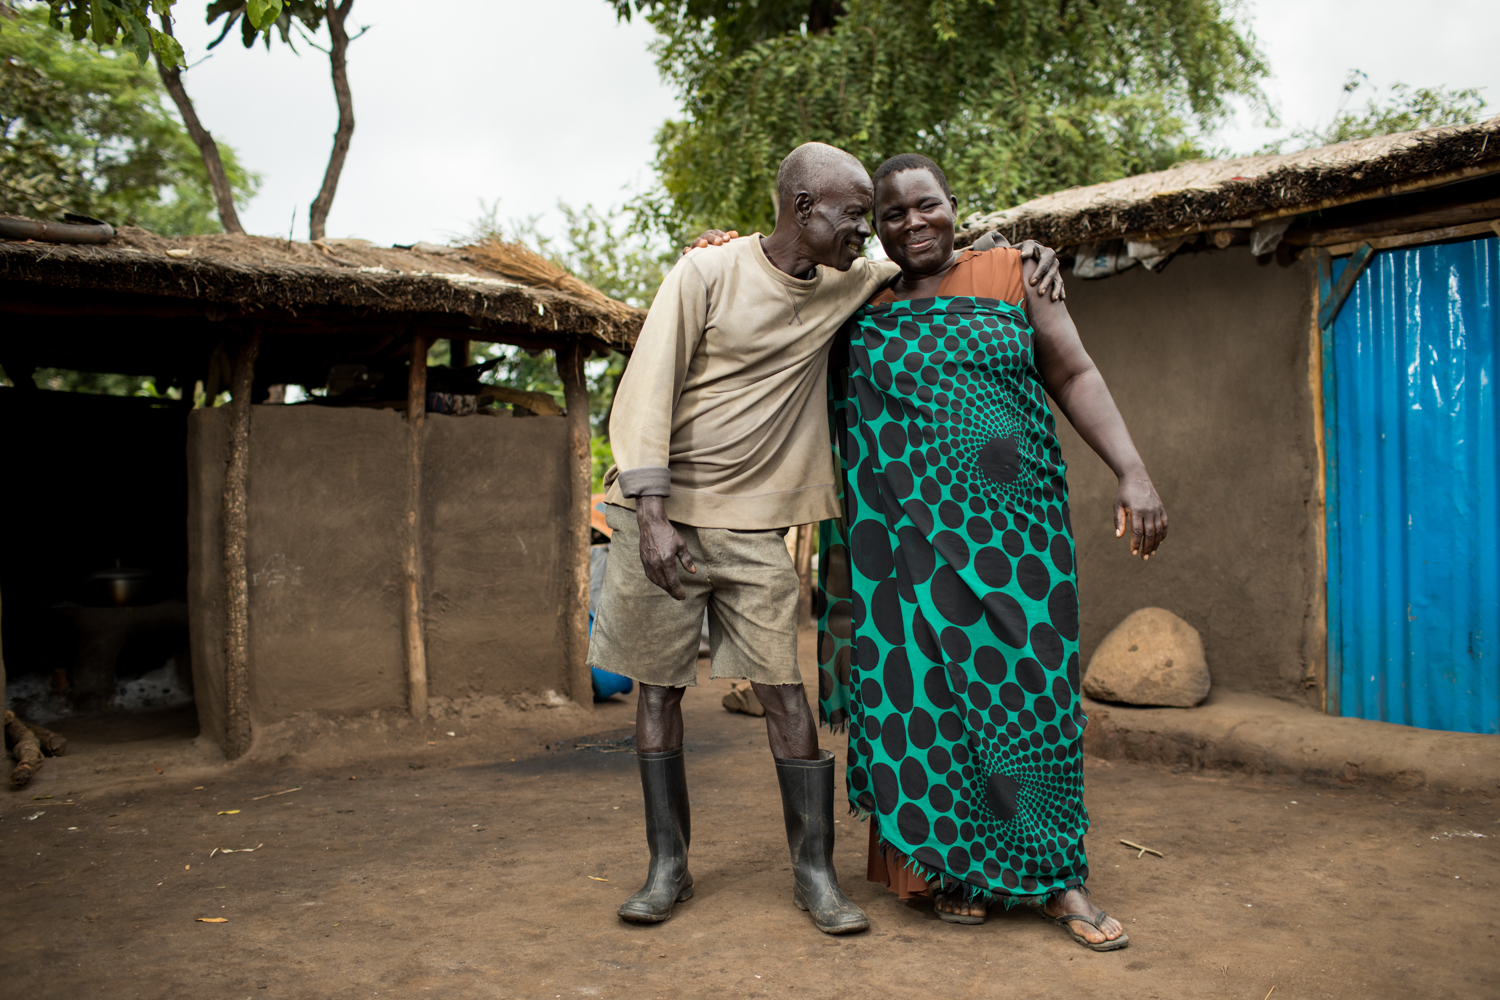 SE savings group member, Flora with her husband Benson in front of their home in the refugee settlement. Photo by Esther Havens.